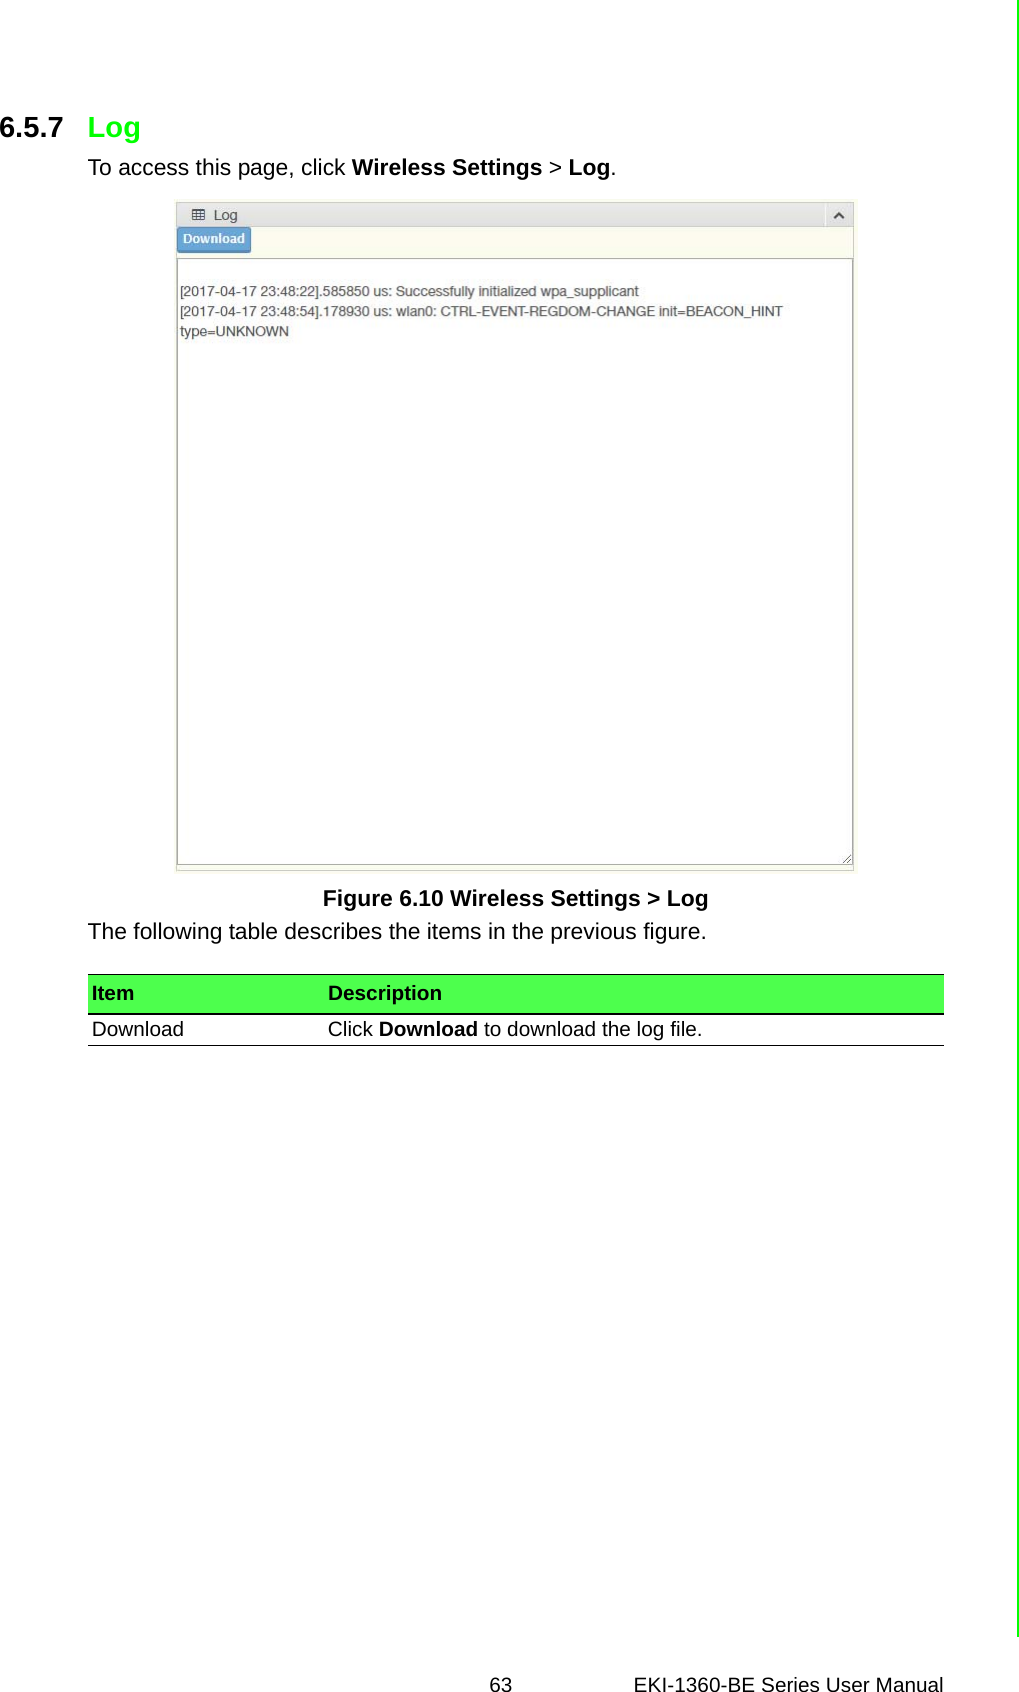 63 EKI-1360-BE Series User Manual 6.5.7 LogTo access this page, click Wireless Settings &gt; Log.Figure 6.10 Wireless Settings &gt; LogThe following table describes the items in the previous figure.Item DescriptionDownload Click Download to download the log file.